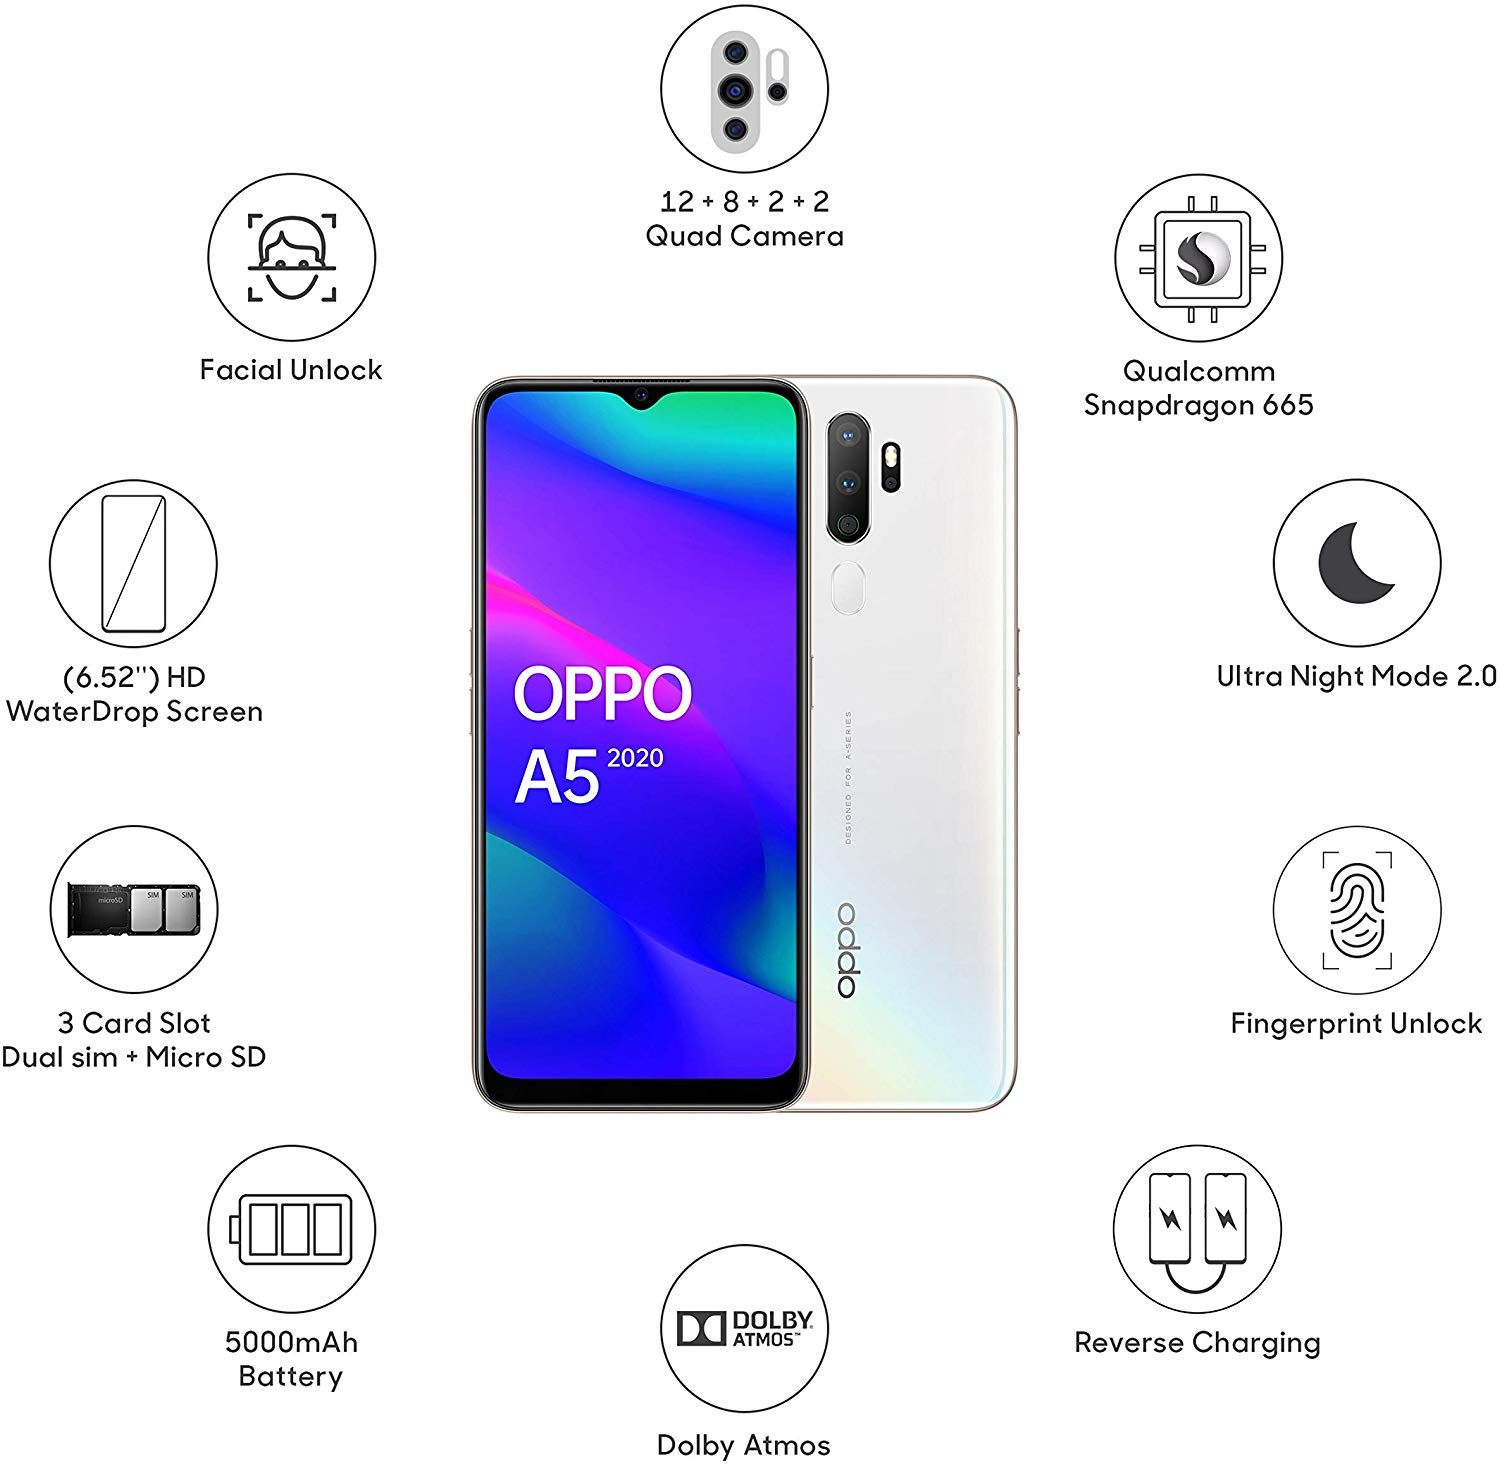 [Exclusive] OPPO A5 2020 price cut in India up to Rs 1,000 in offline